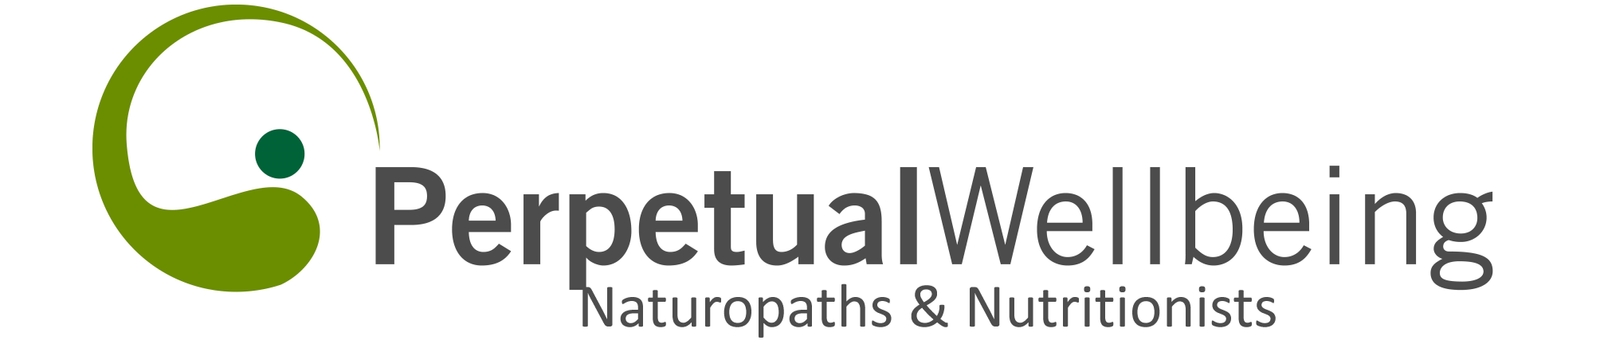 Perpetual Wellbeing Natural Health Clinic